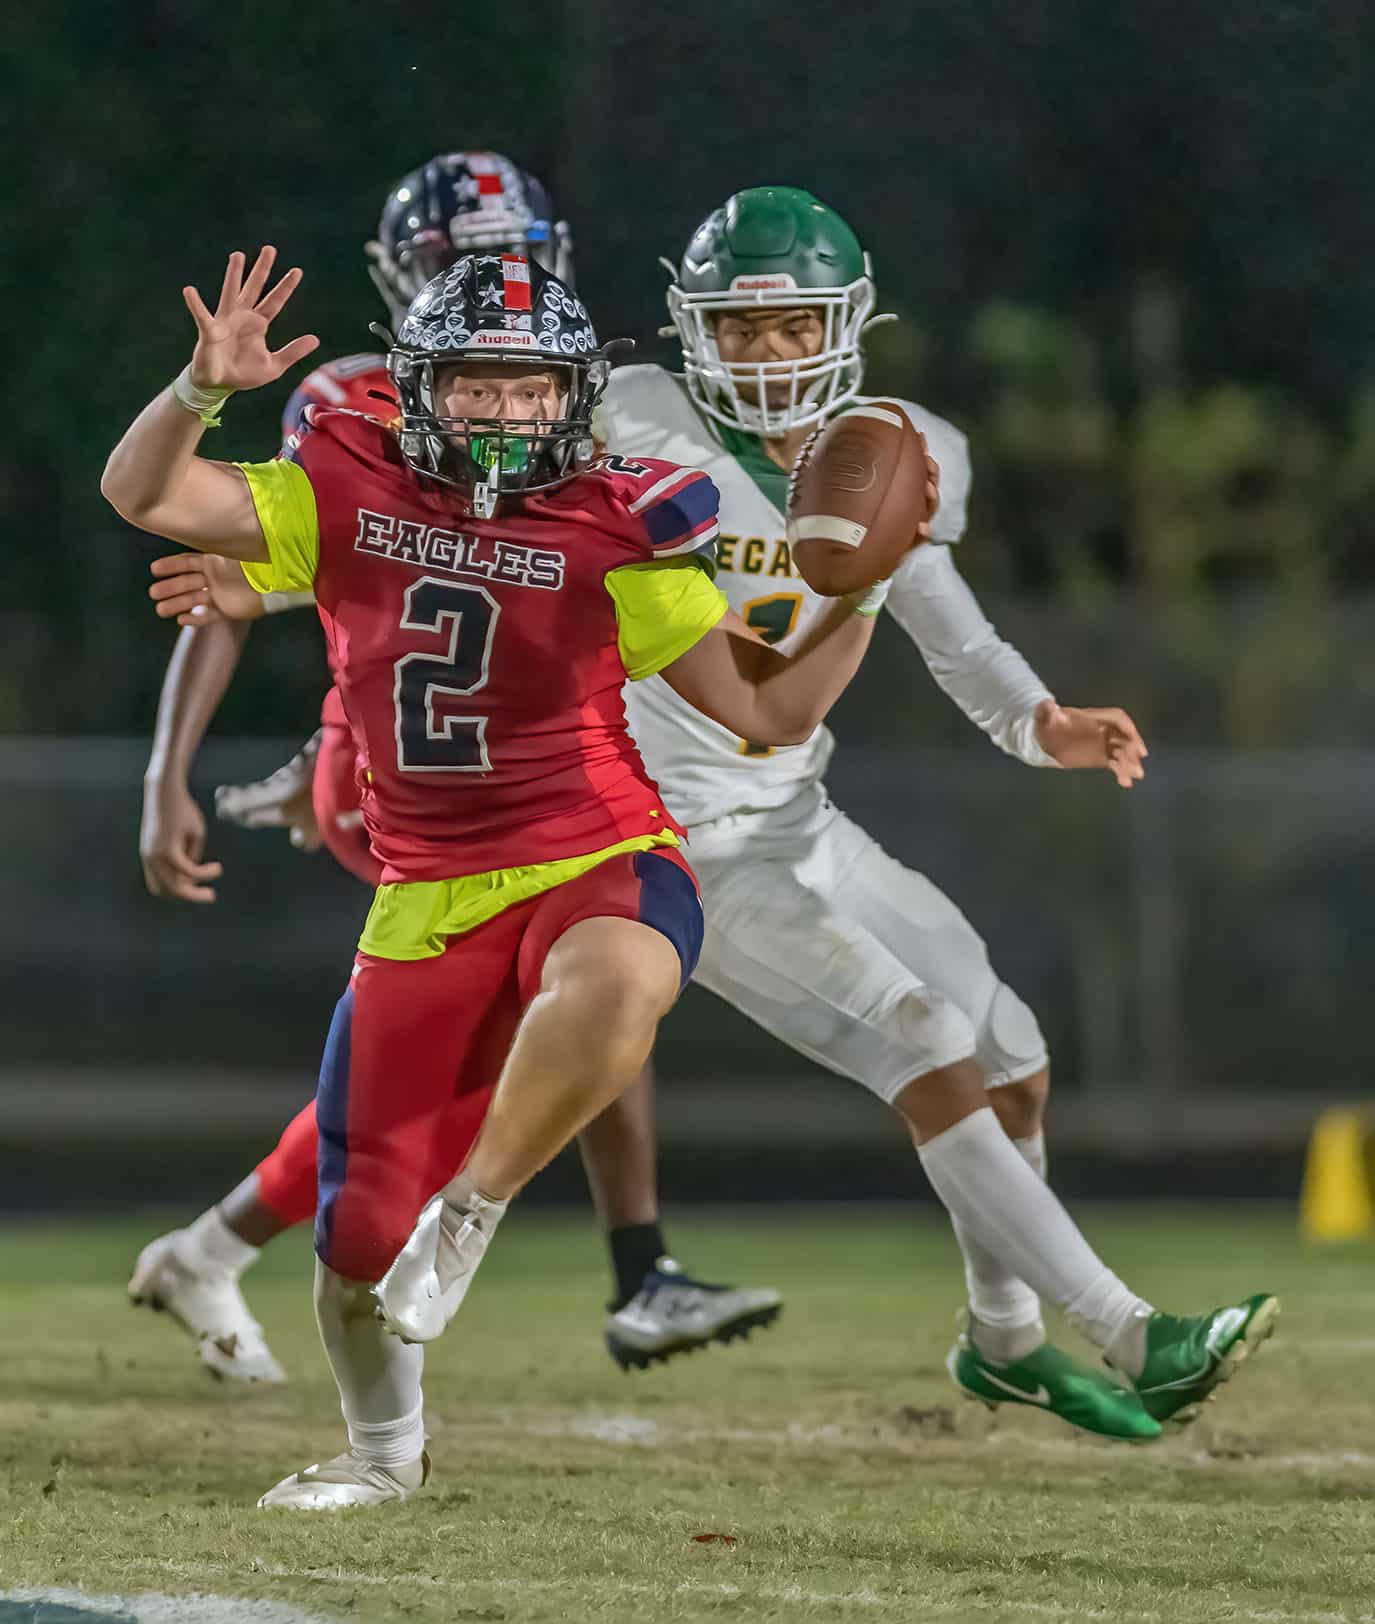 Roman Strat, 2, Springstead linebacker intercepted this Lecanto pass attempt late in the first half of Springstead High’s 14-0 win at home Friday night. Photo by JOE DiCRISTOFALO